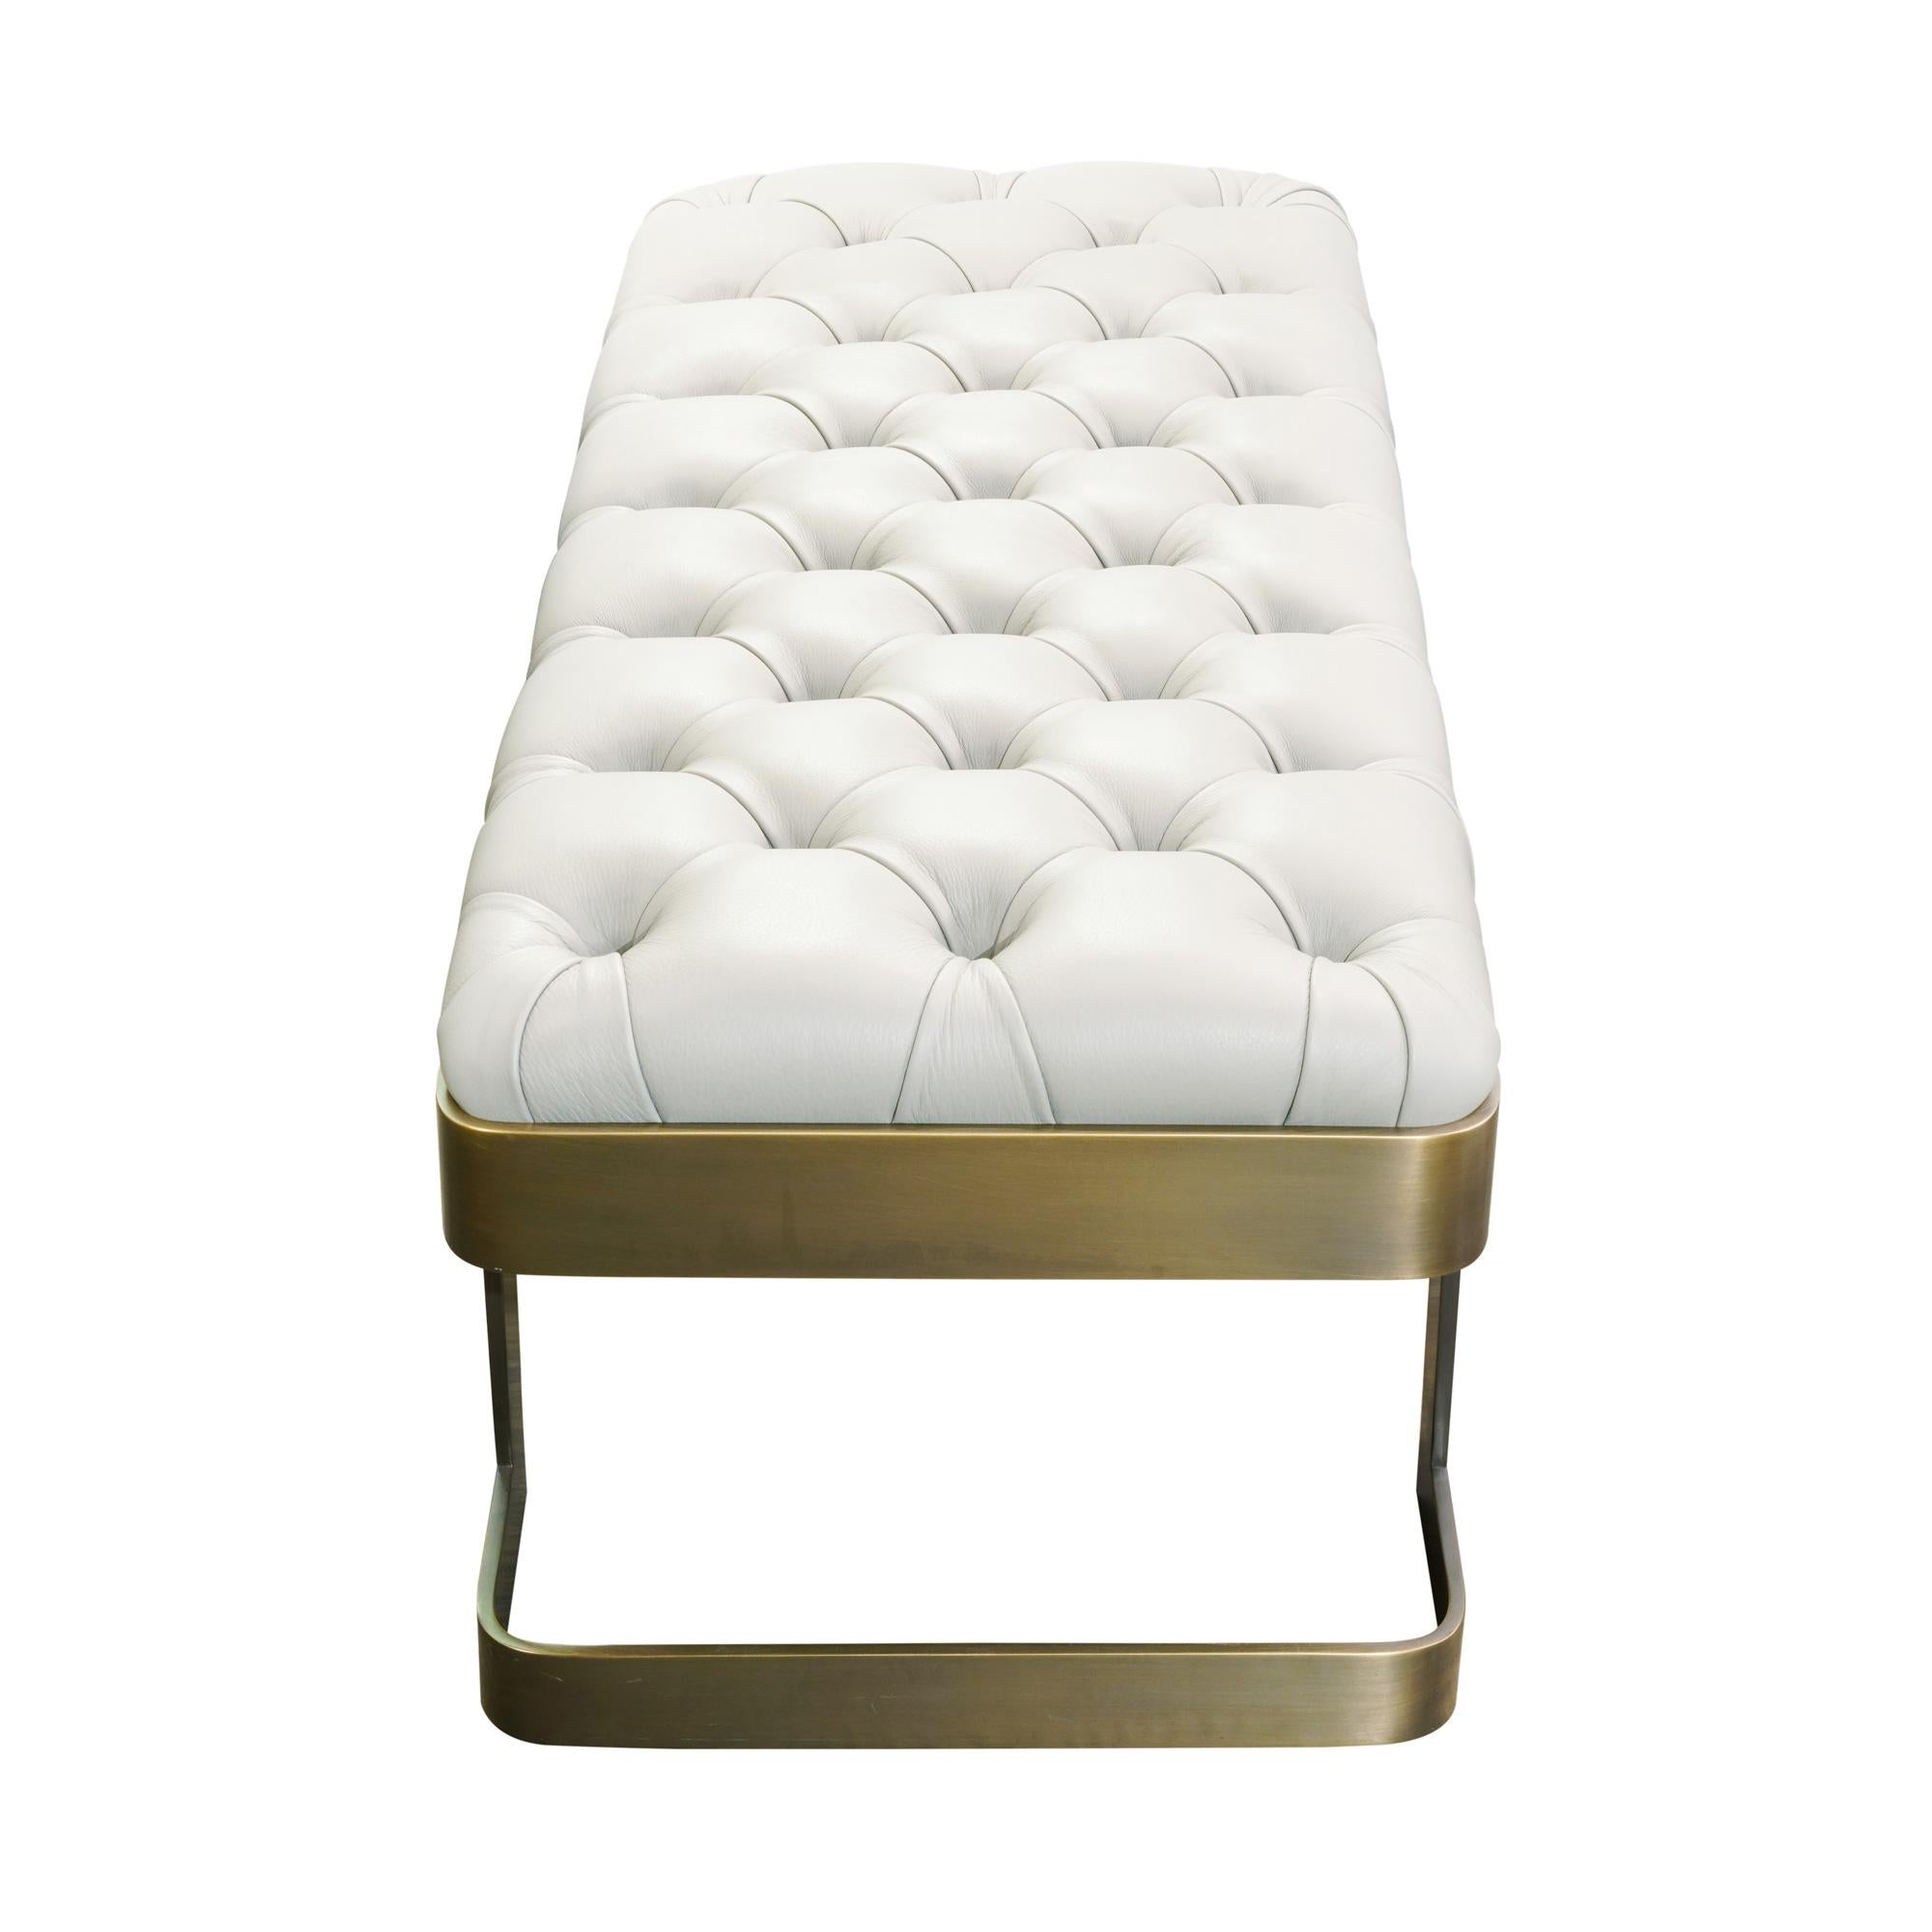 Elegant tufted leather bench with solid bronze legs.
Can be customized to your specifications or COM.